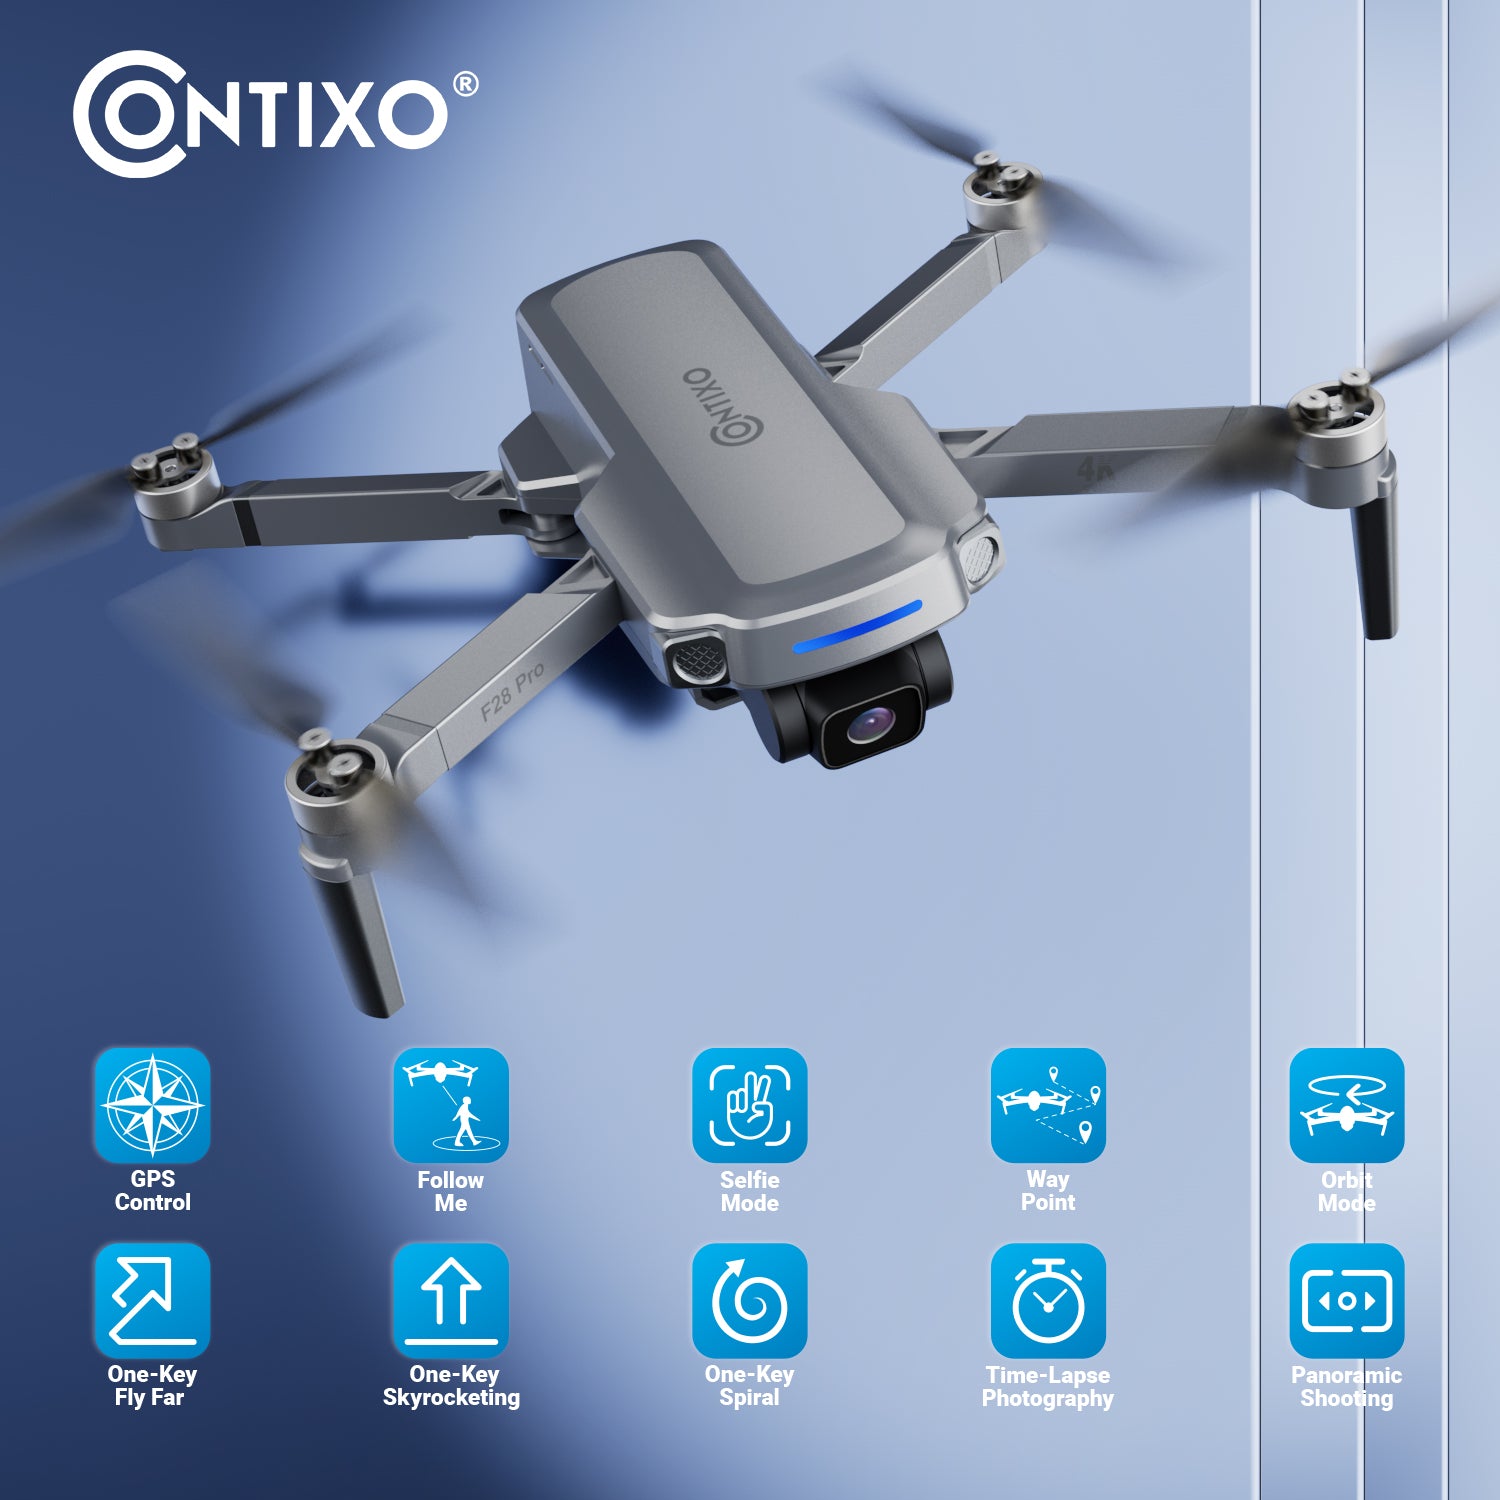 Contixo F28 Pro Foldable GPS Drone - 4K FHD Camera W GPS Control & Selfie Mode - Brushless Motor - with Carrying Case